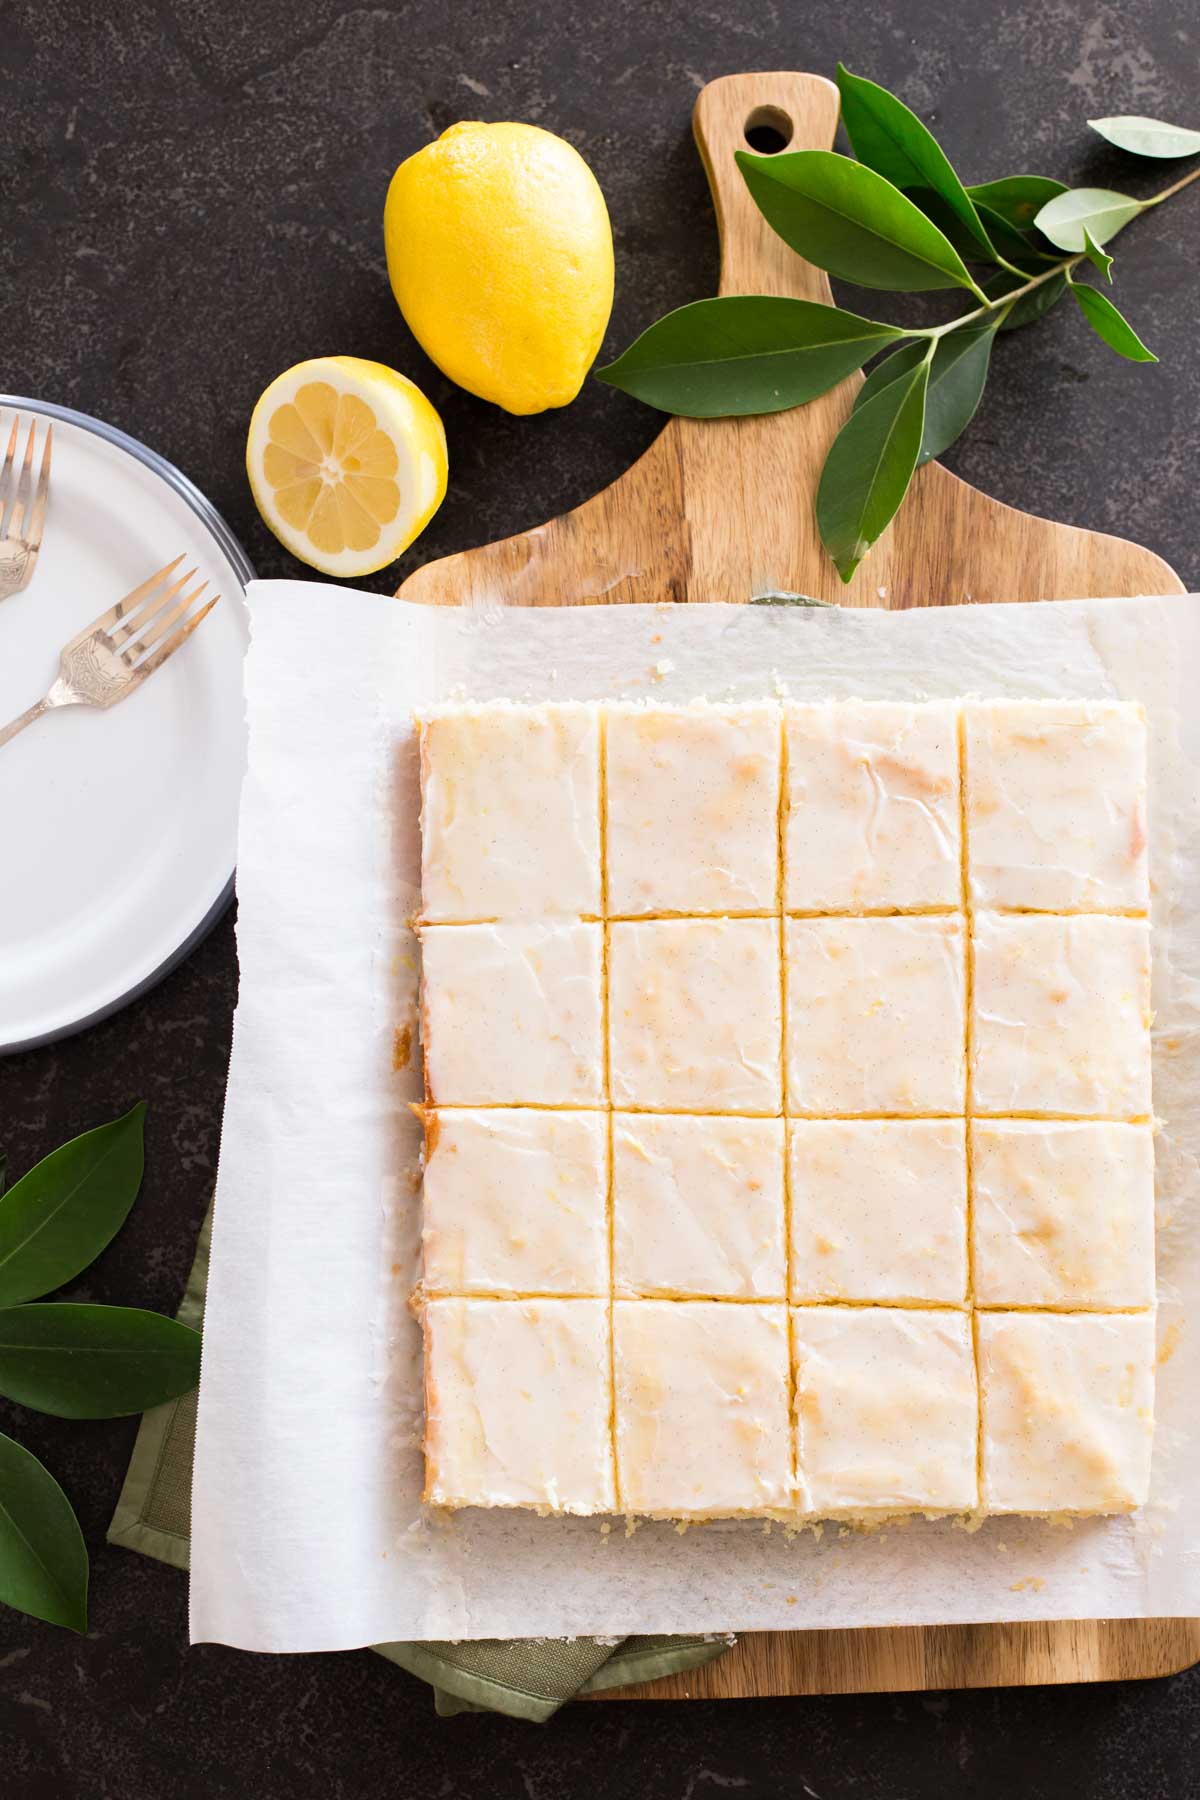 Vanilla Bean Lemon Bars cut into squares on parchment paper on top of a cutting board, with lemons and tree leaves next to the board, along with some plates and forks. 